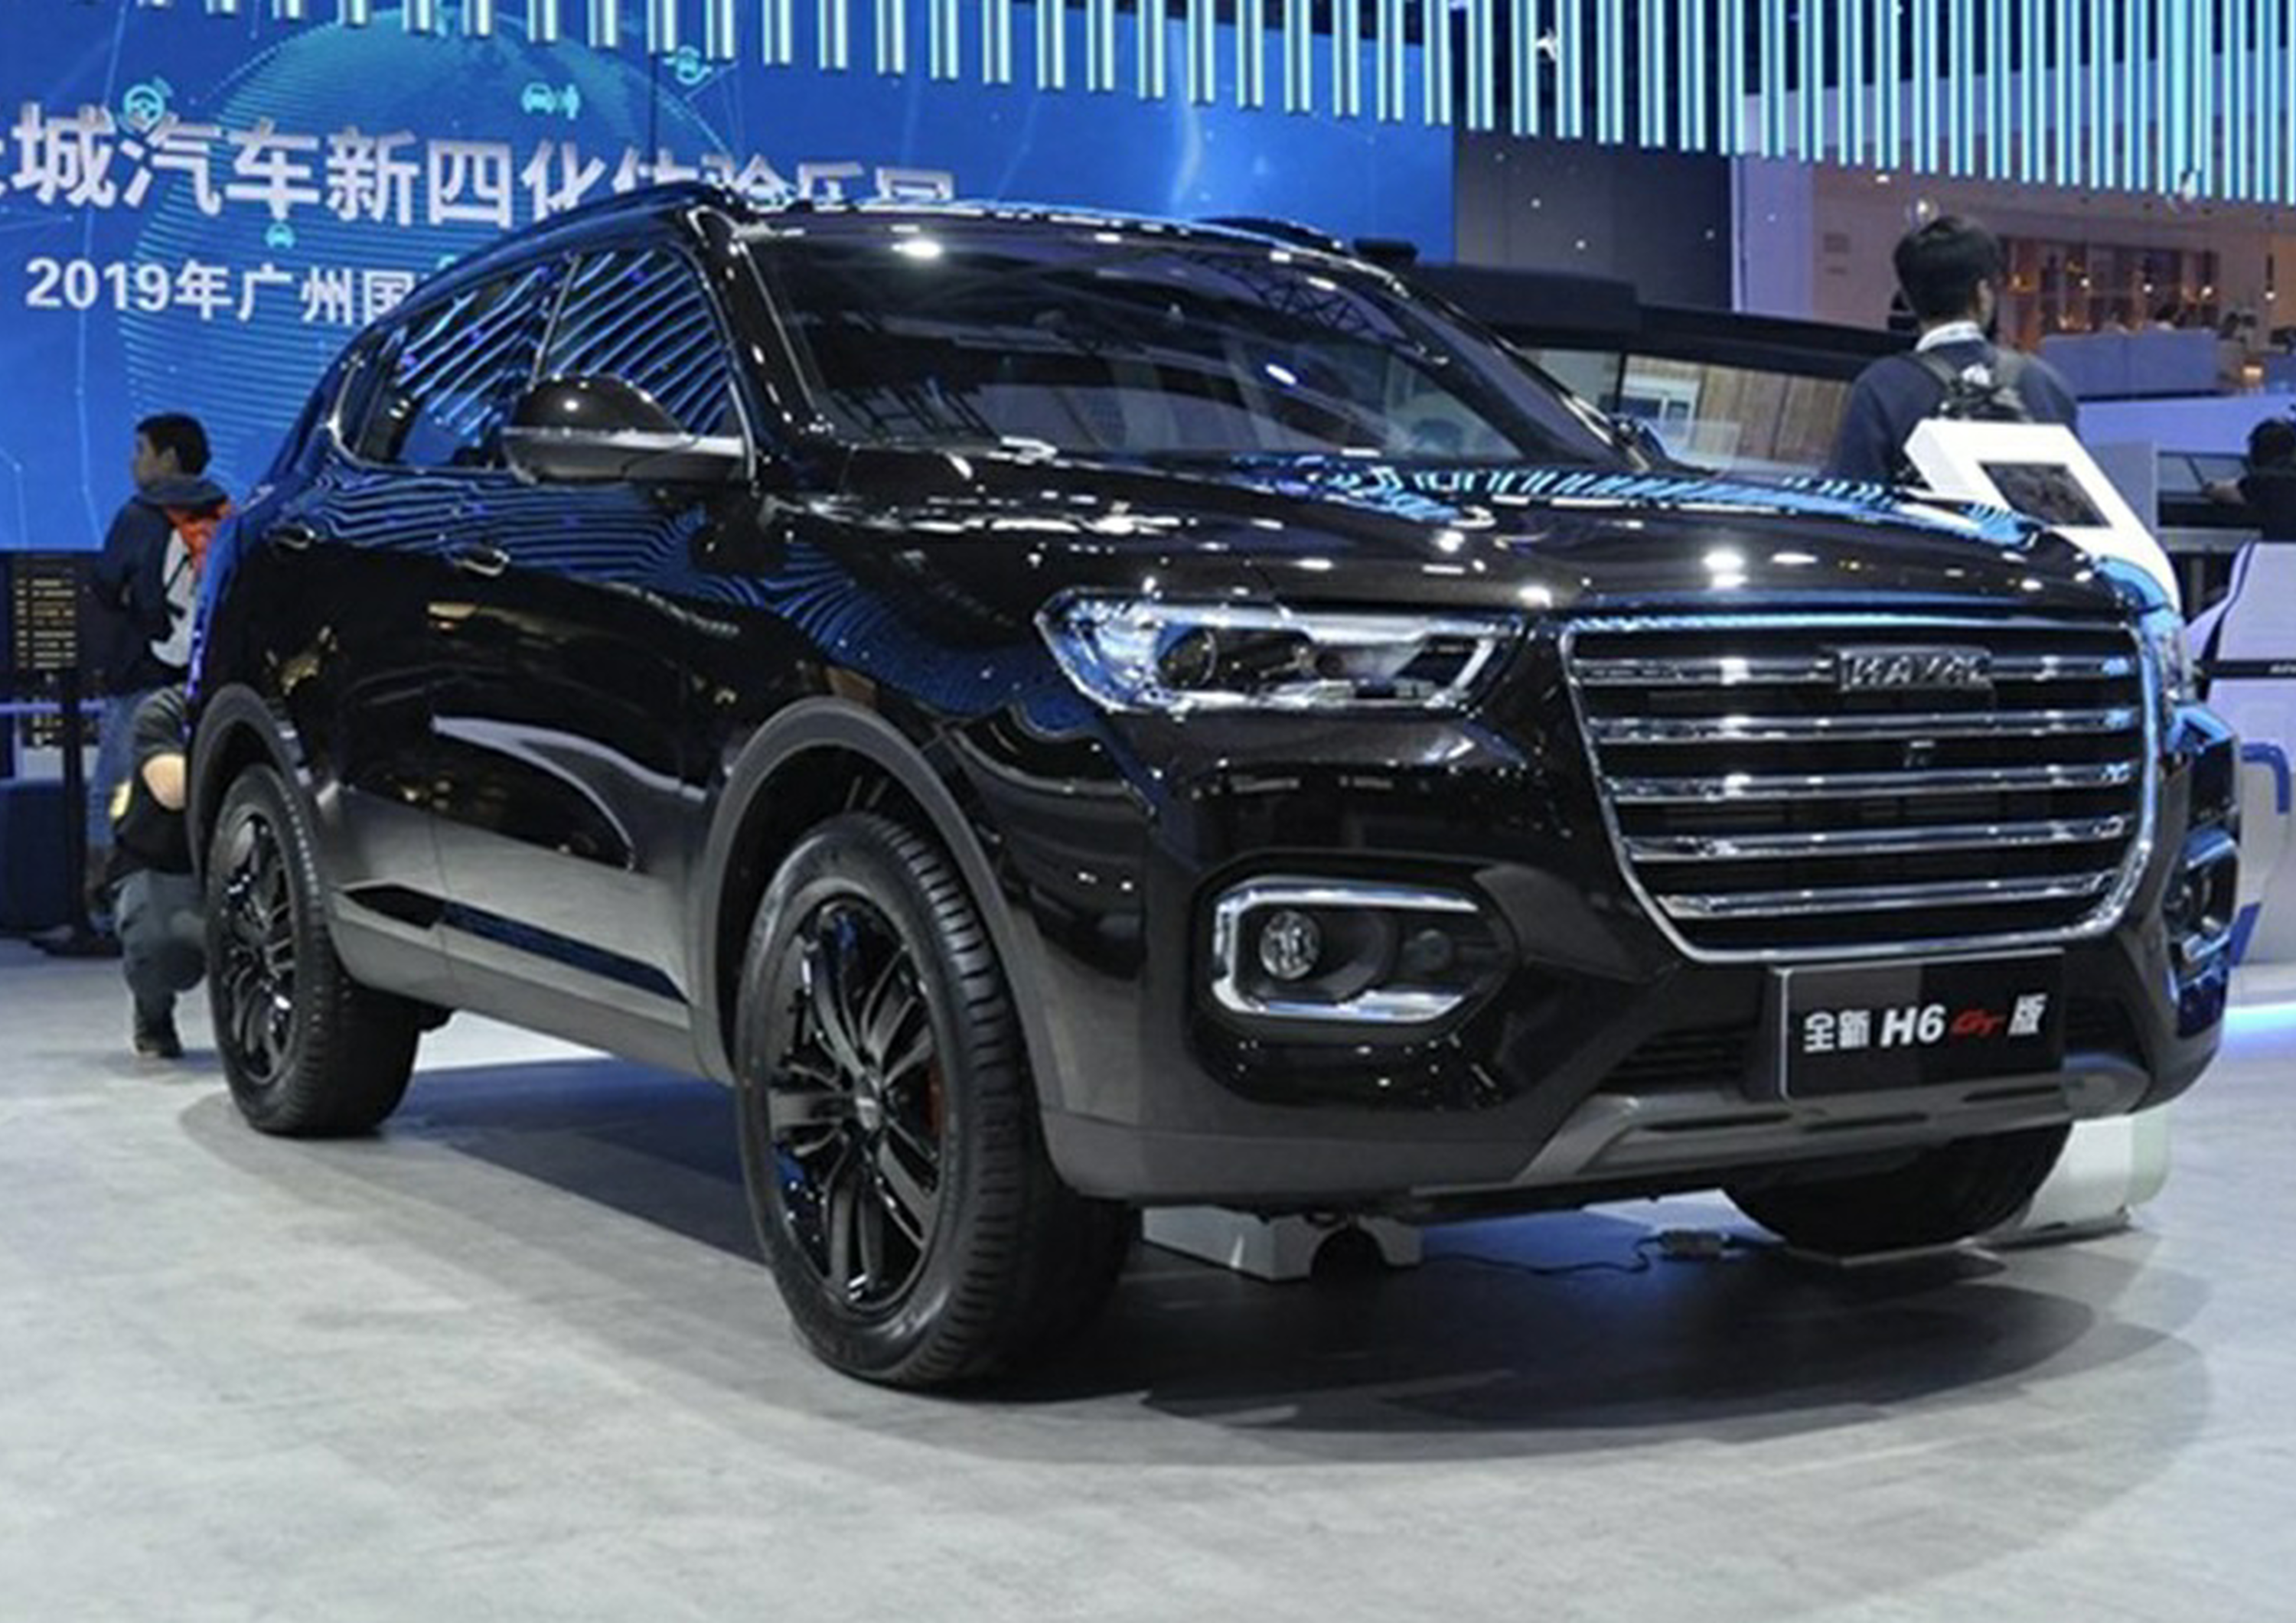 Haval H6 GT in China launch